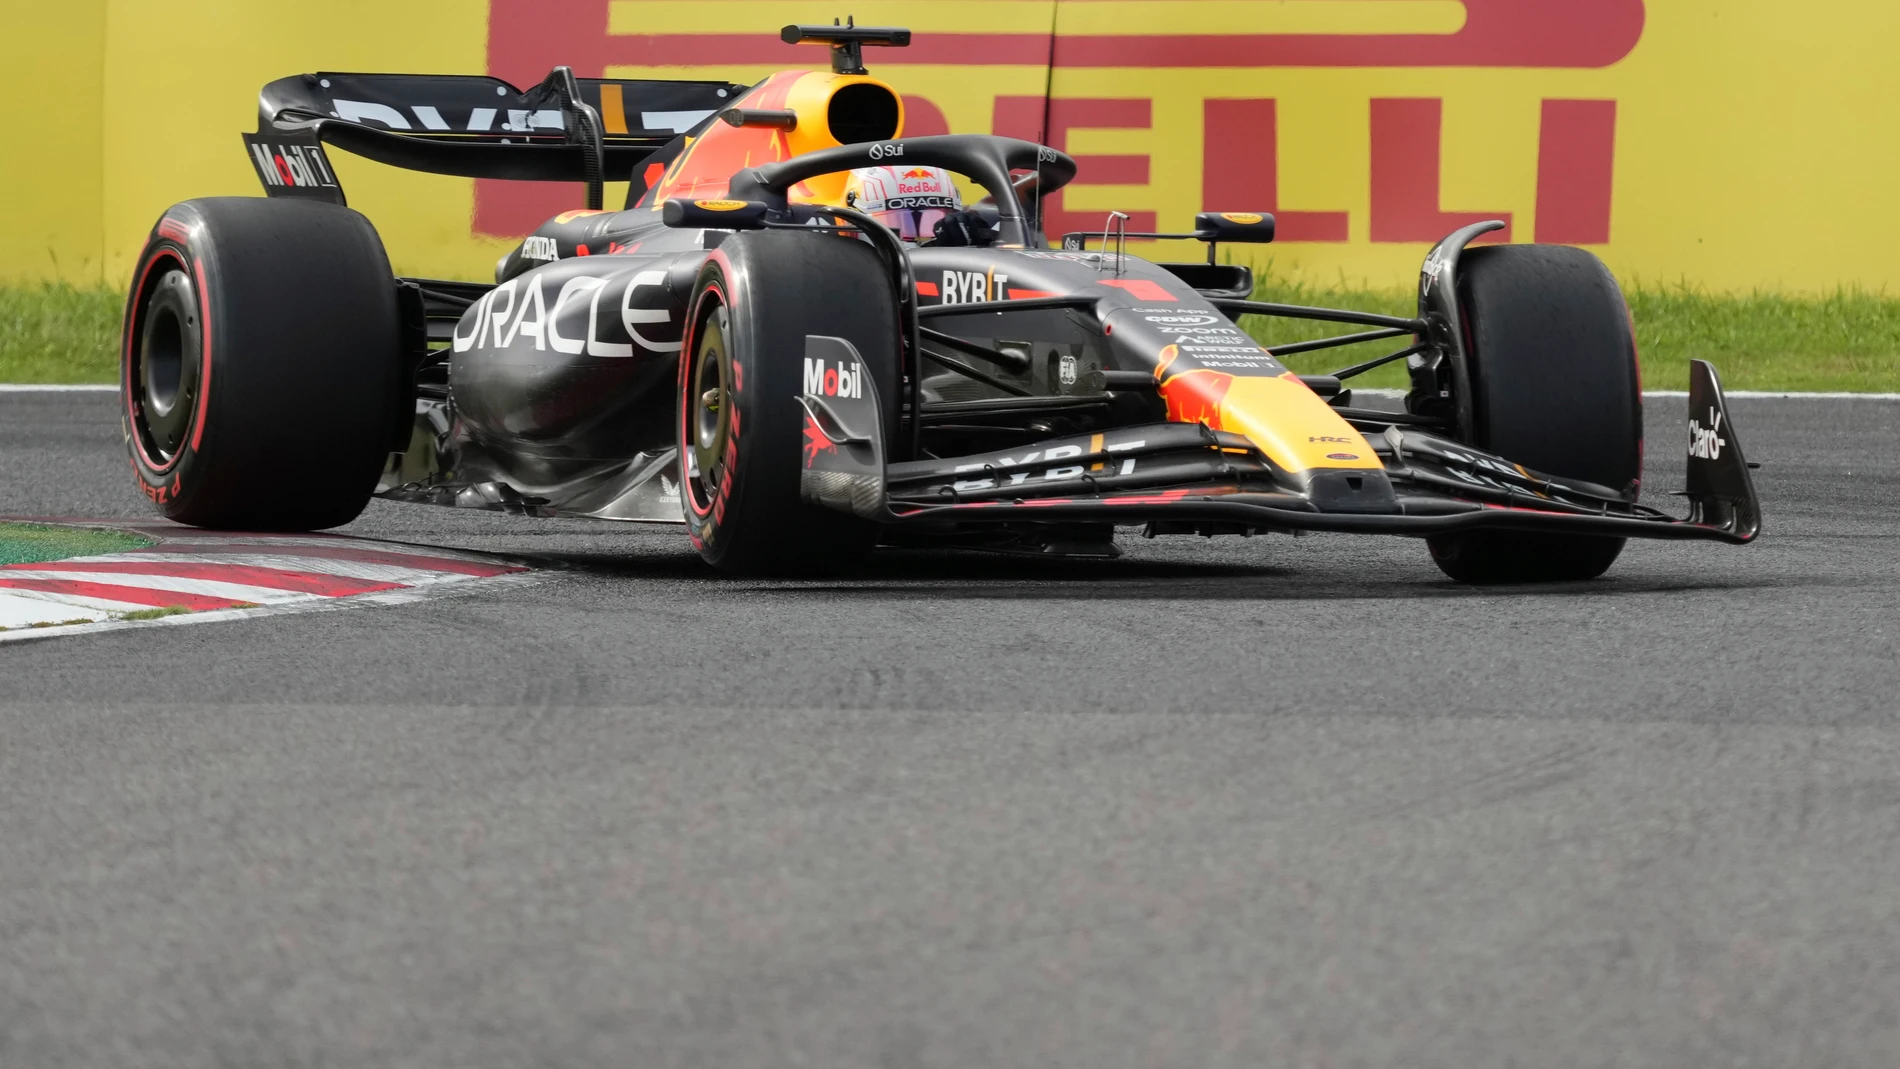 Red Bull driver Max Verstappen of the Netherlands steers his car during qualifying session for the Japanese Formula One Grand Prix at the Suzuka Circuit, Suzuka, central Japan, Saturday, Sept. 23, 2023. (AP Photo/Toru Hanai)